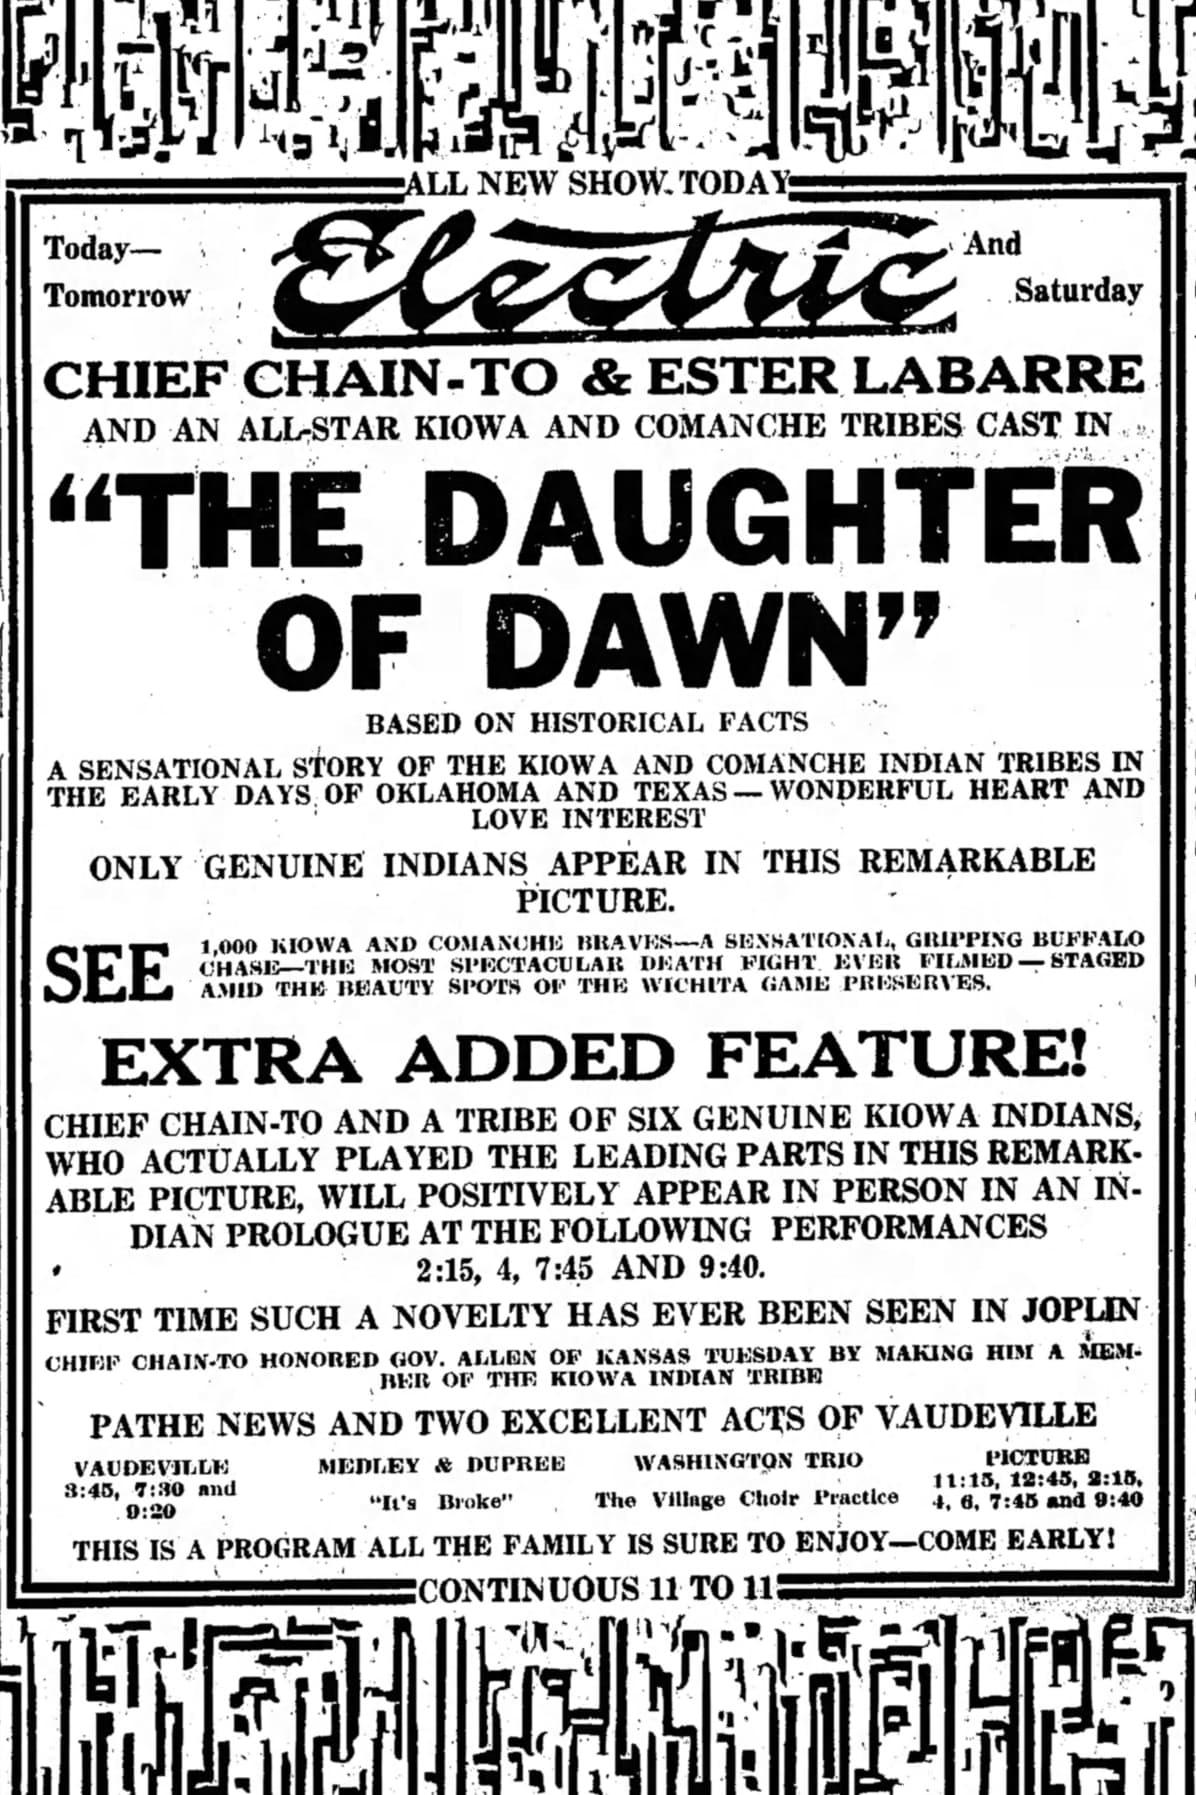 The Daughter of Dawn poster